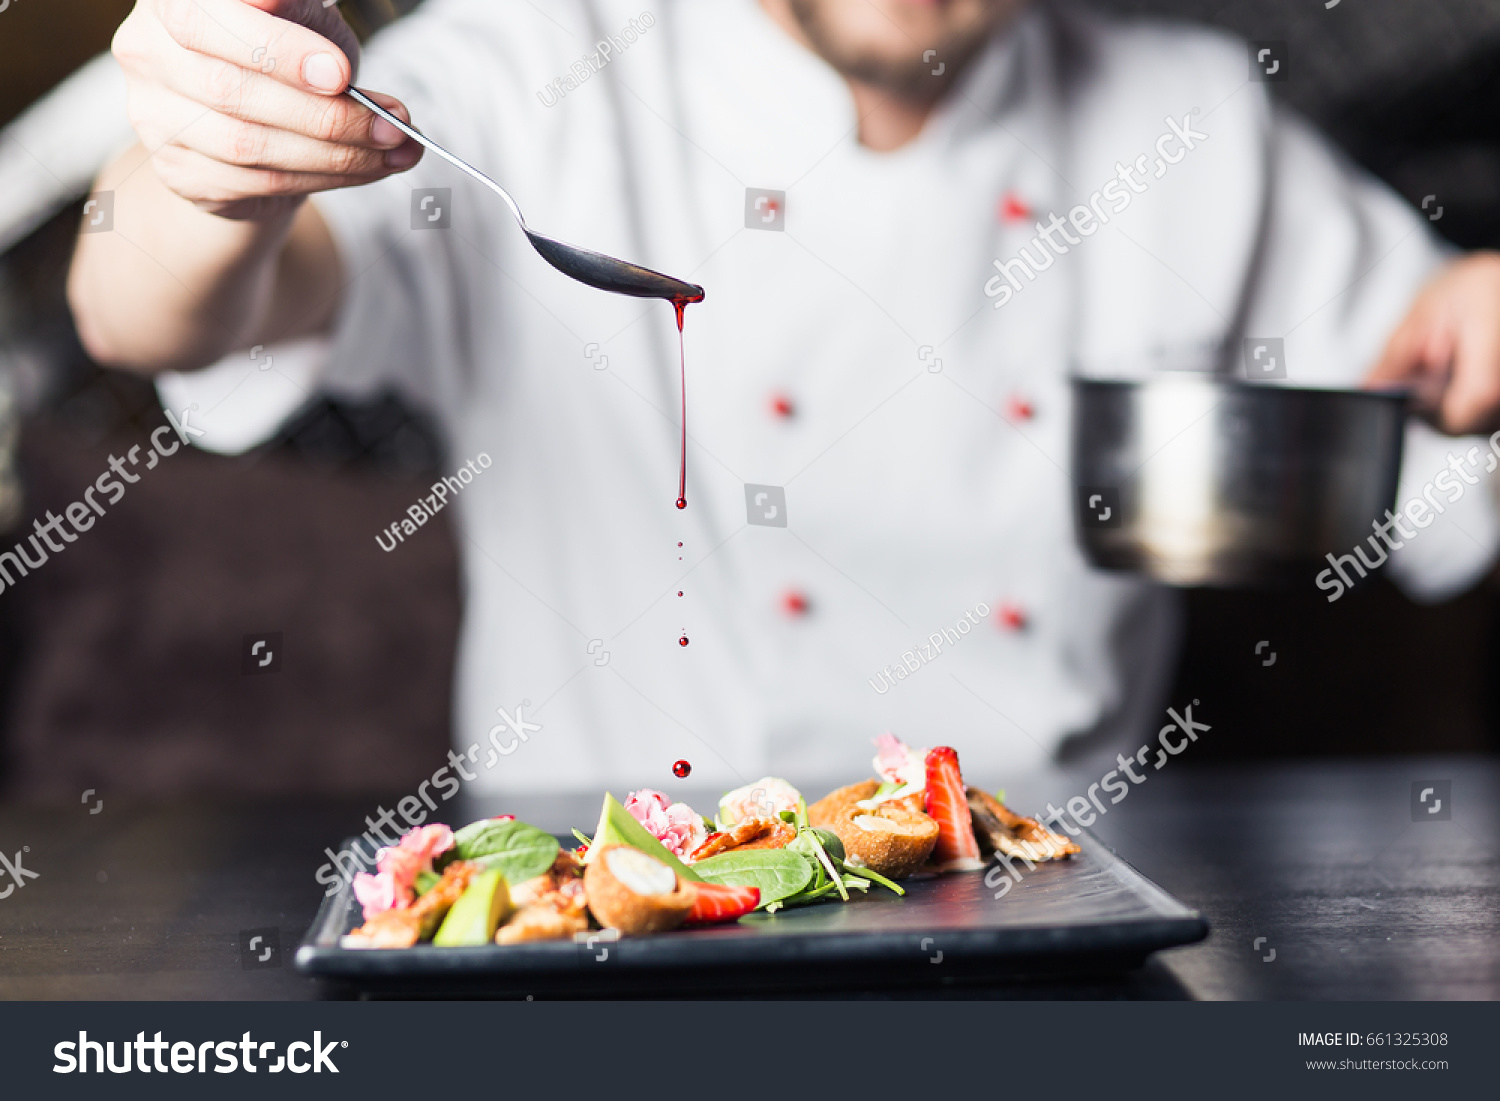 male cooks preparing meat in the restaurant kitchen #661325308